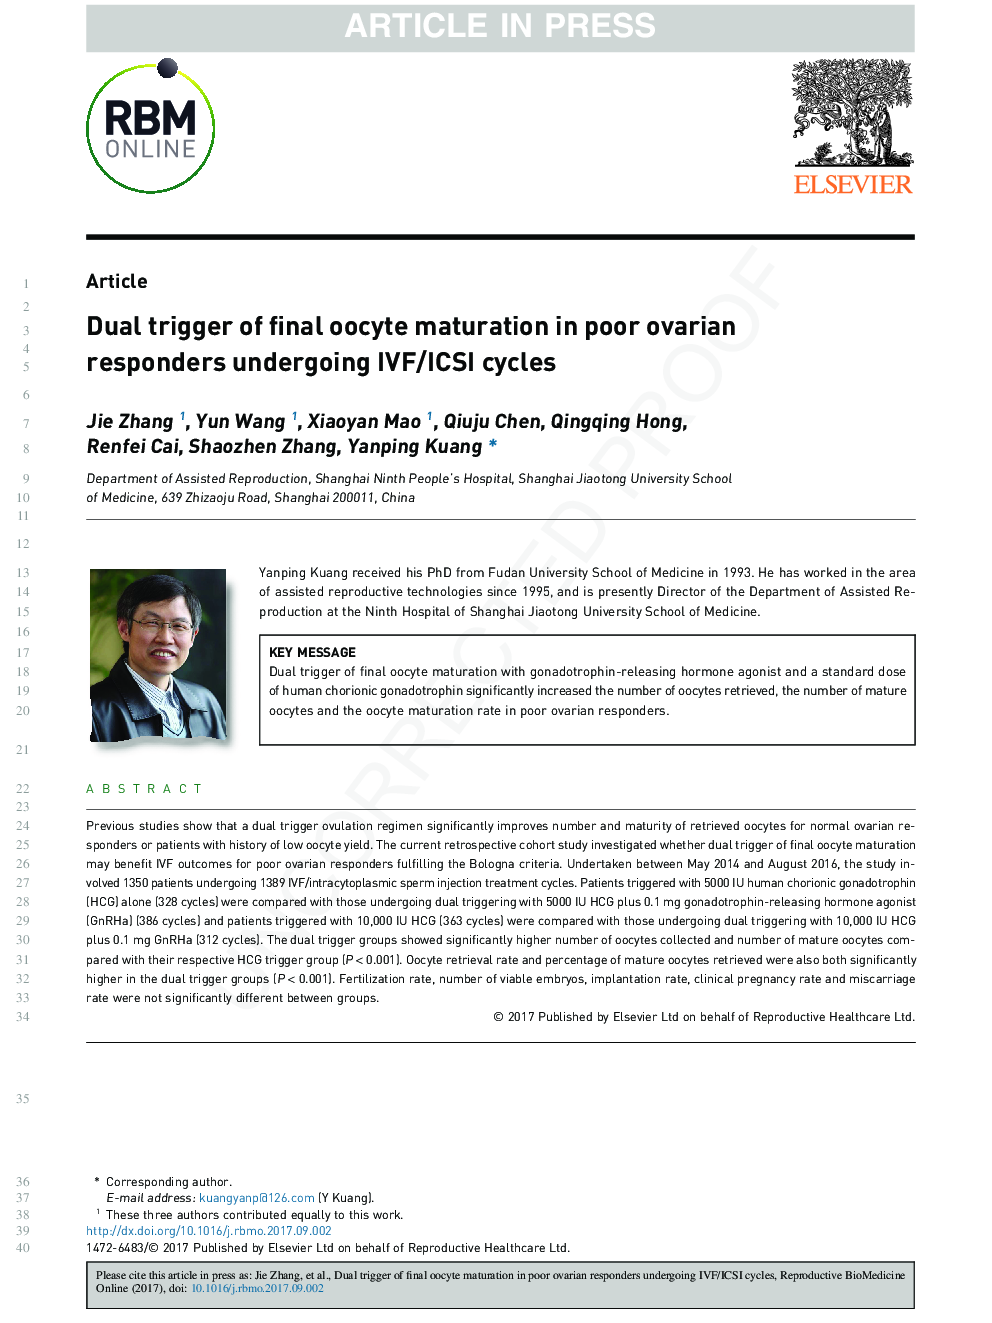 Dual trigger of final oocyte maturation in poor ovarian responders undergoing IVF/ICSI cycles